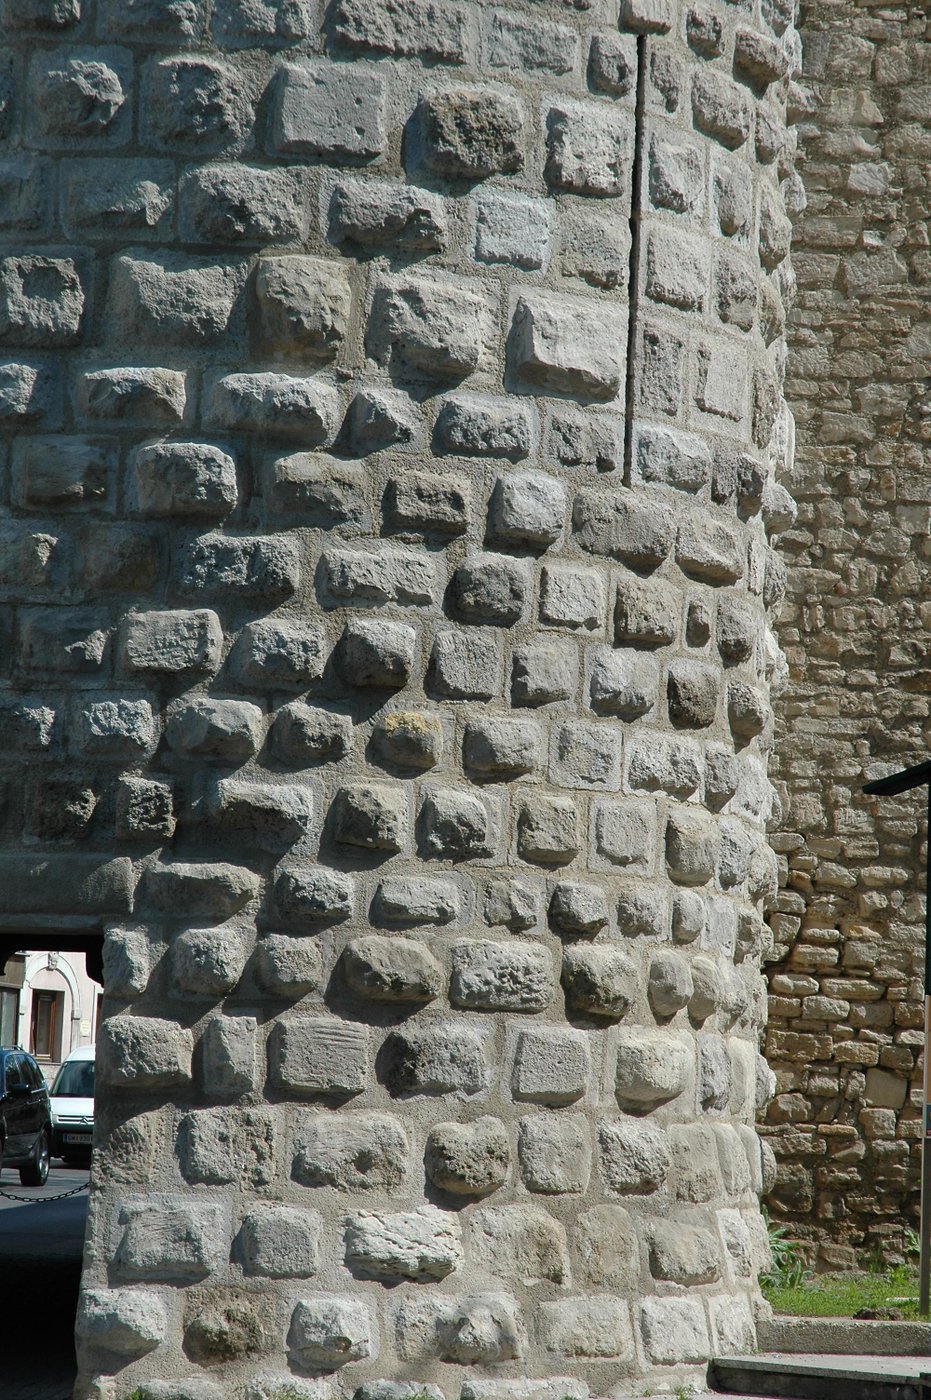 Vienna Gate in Hainburg in Lower Austria: Detail of the ashlar masonry with uneven surface